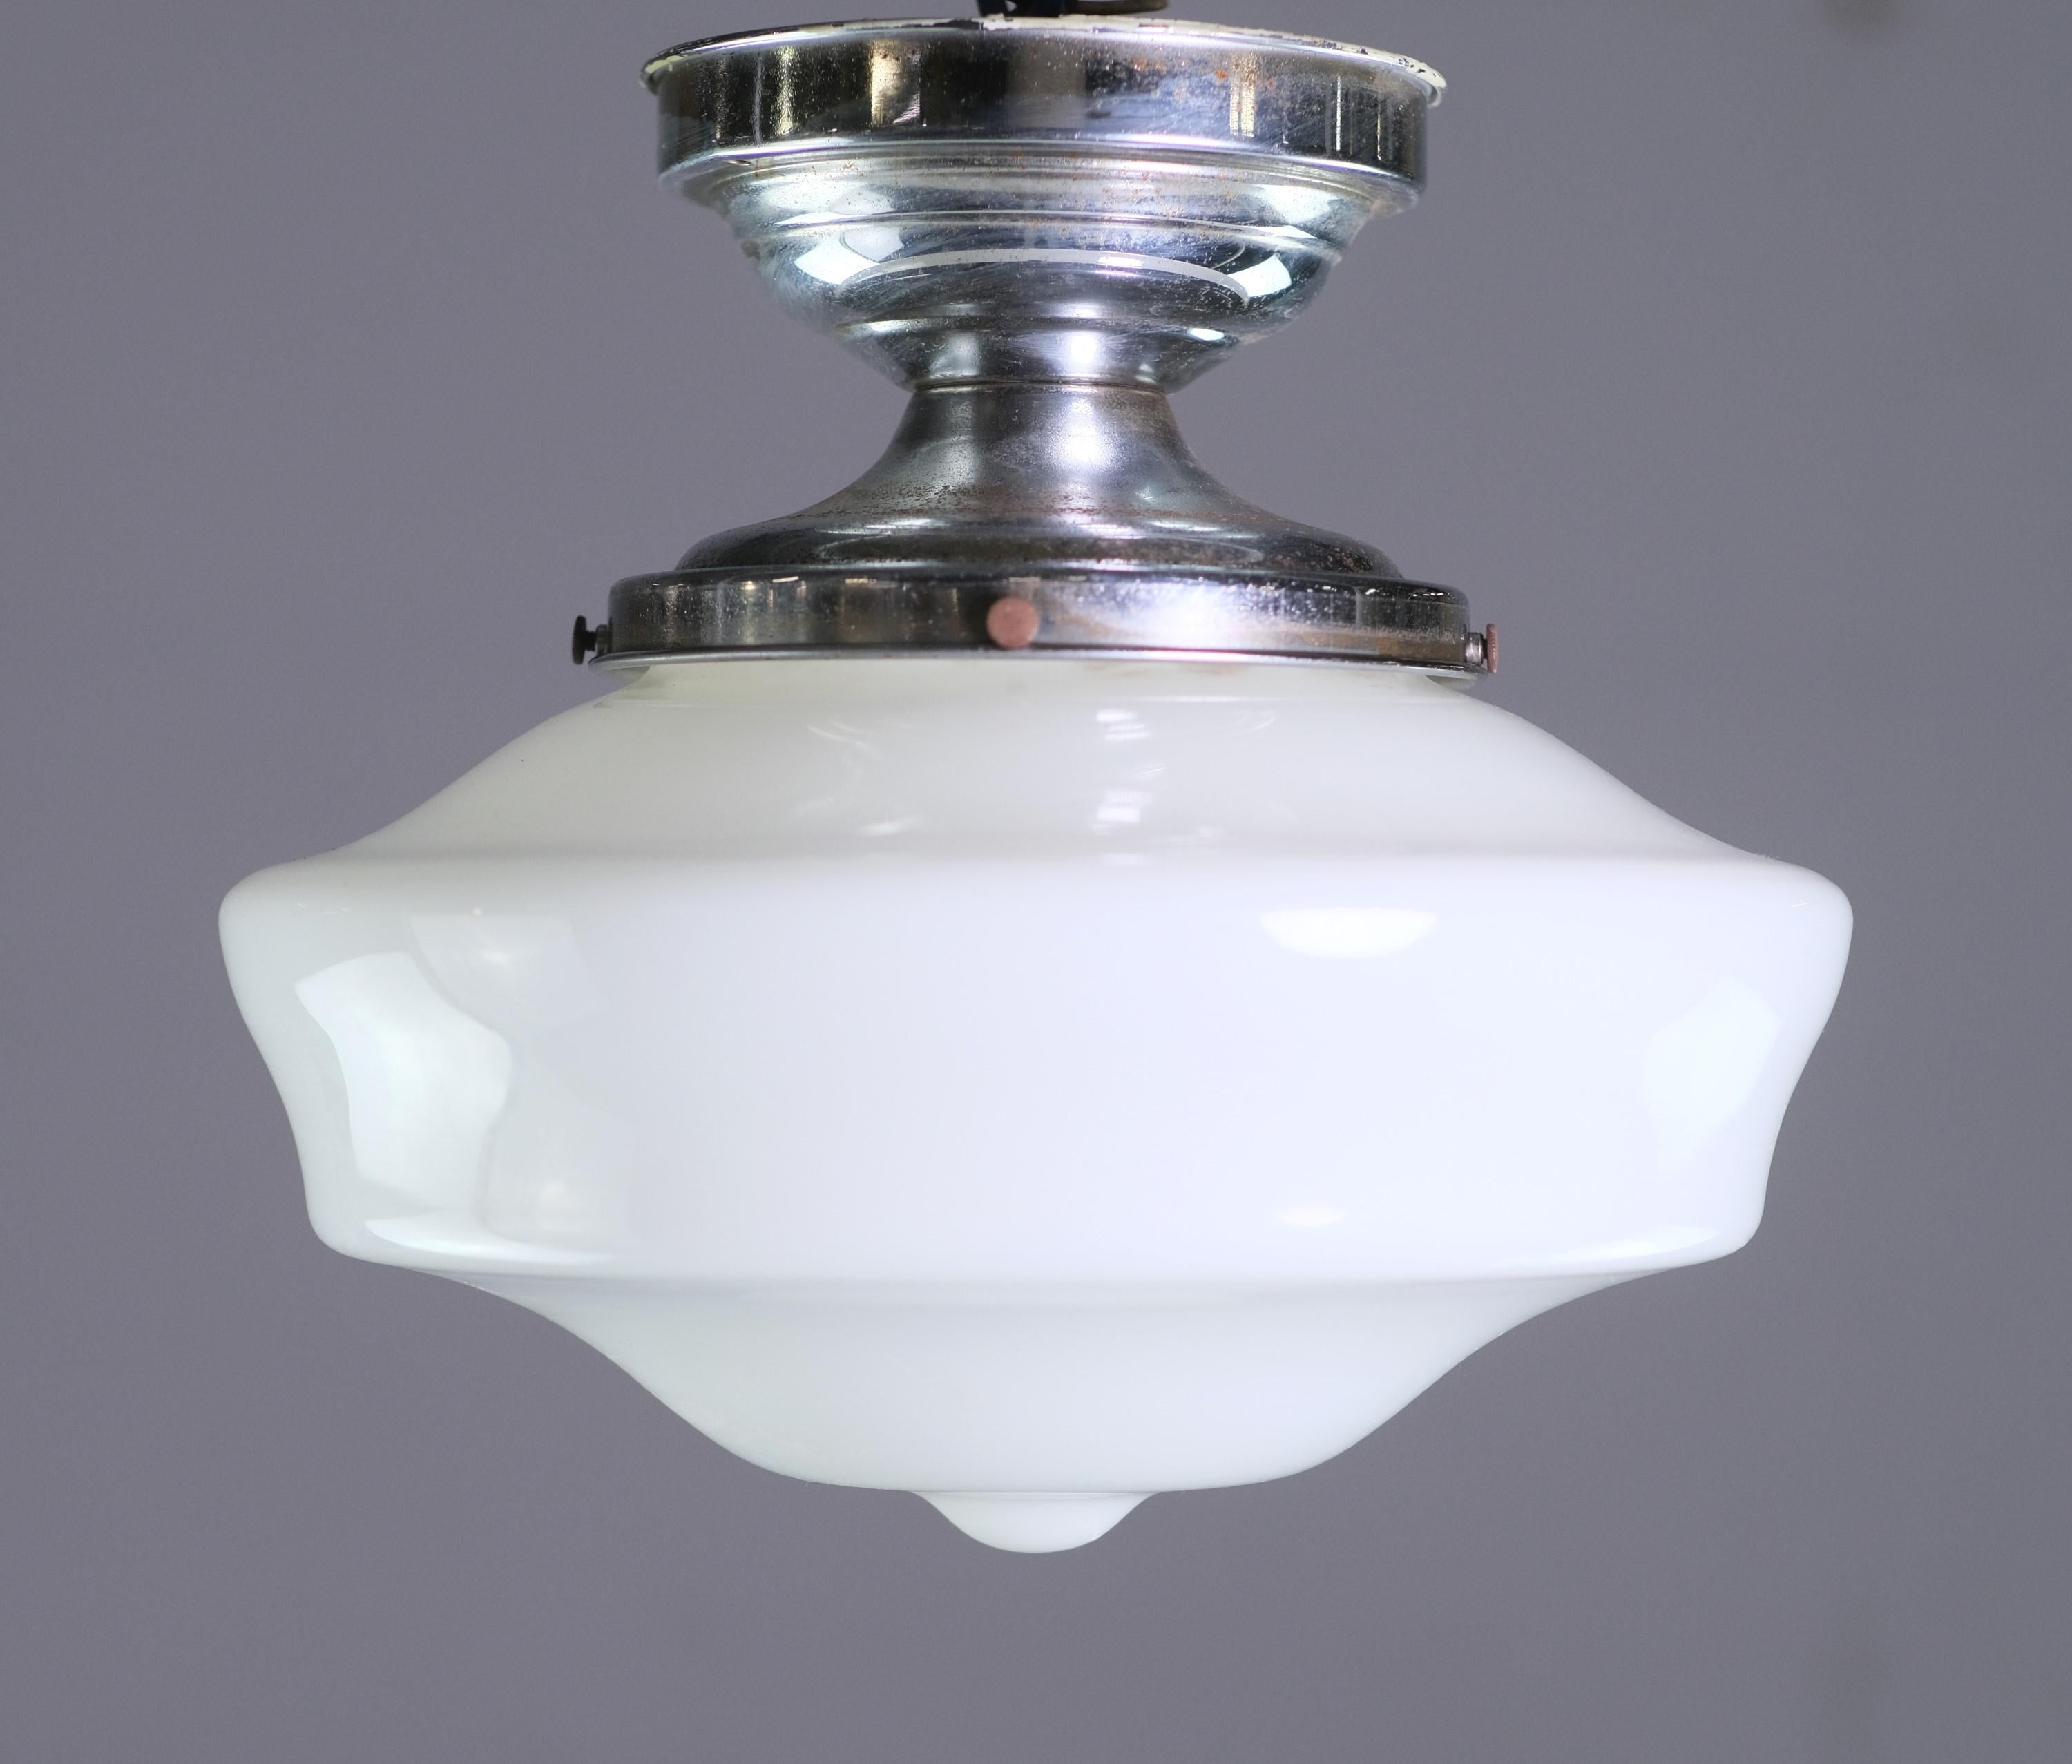 Early 20th century semi-flush schoolhouse light. Features original fitter and a stylish white schoolhouse shade. Small quantity available at time of posting. Please inquire. Priced each. Please note, this item is located in one of our NYC locations.